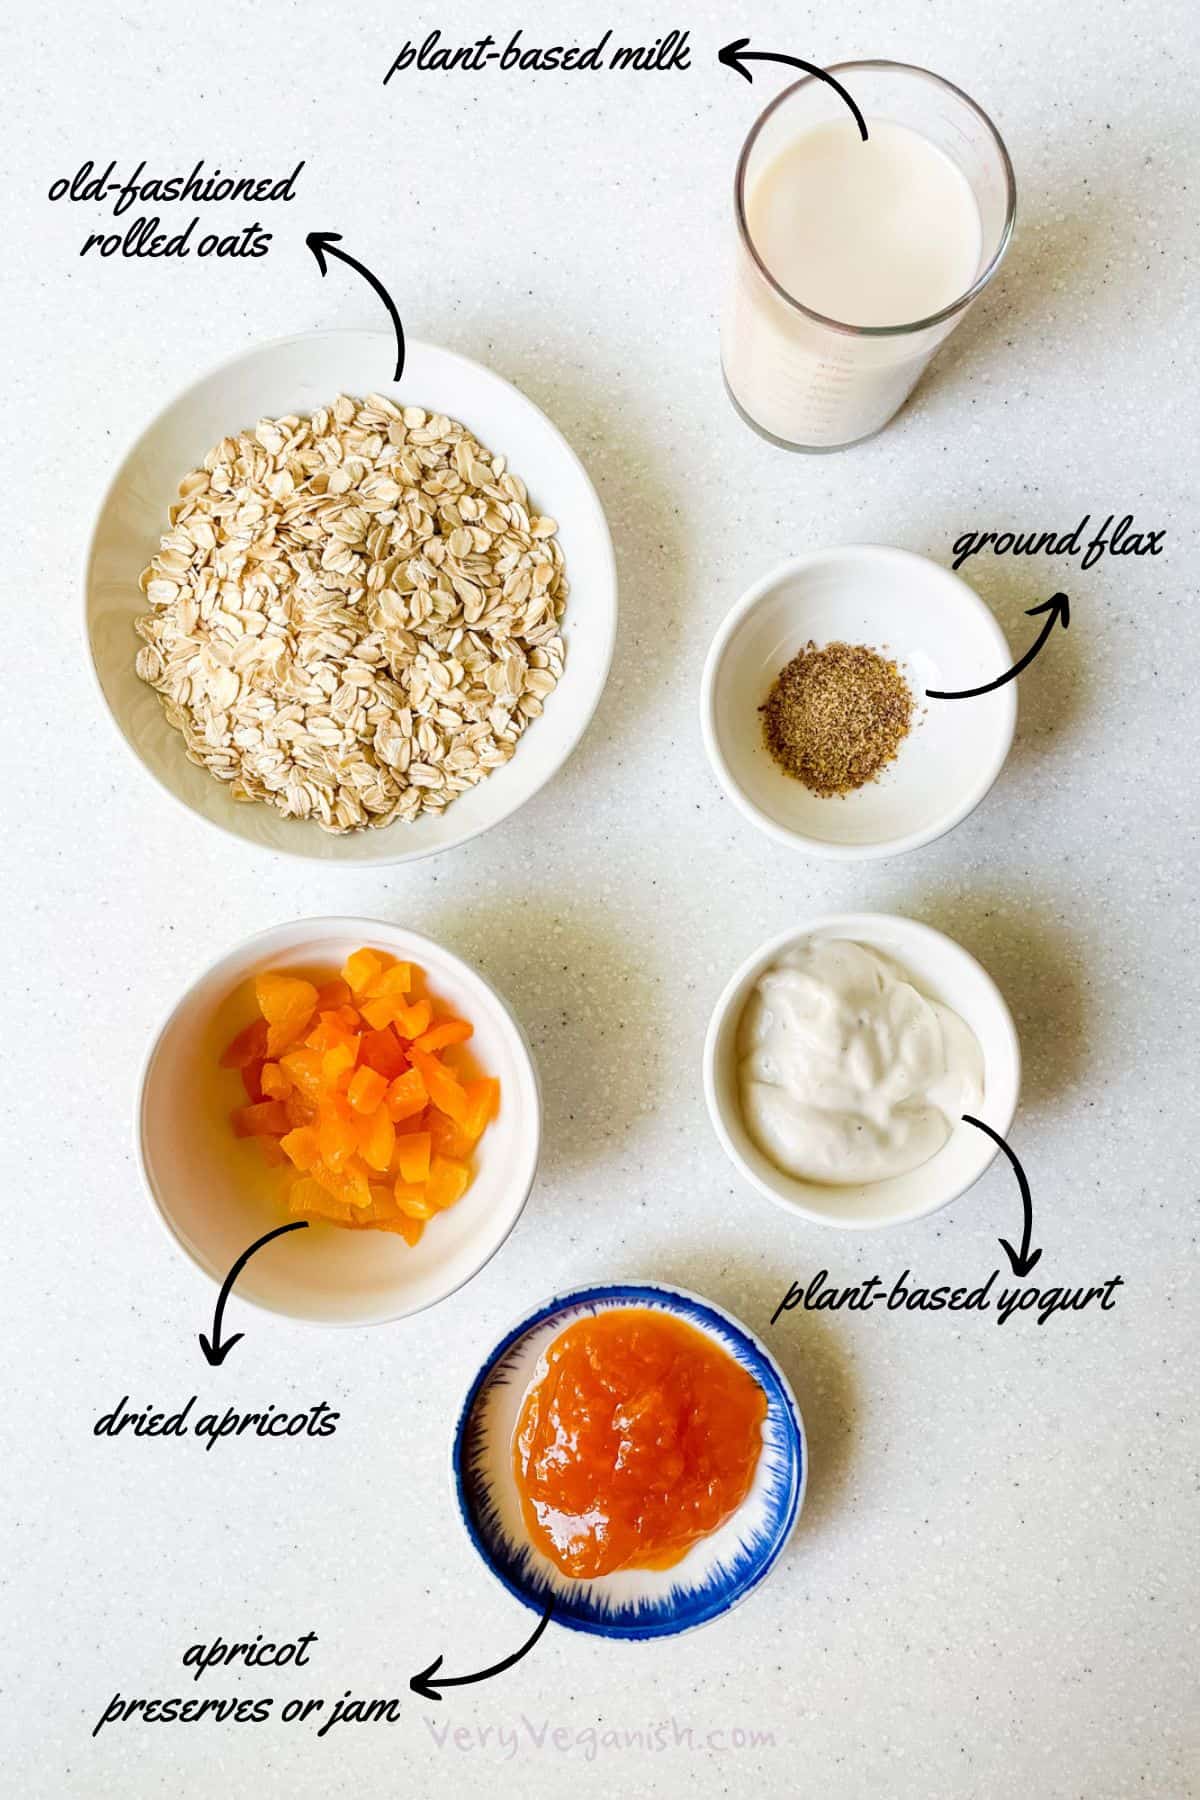 ingredients for apricot overnight oats: old-fashioned rolled oats, plant-based milk, ground flax, plant-based yogurt, dried apricots and apricot preserves or jam